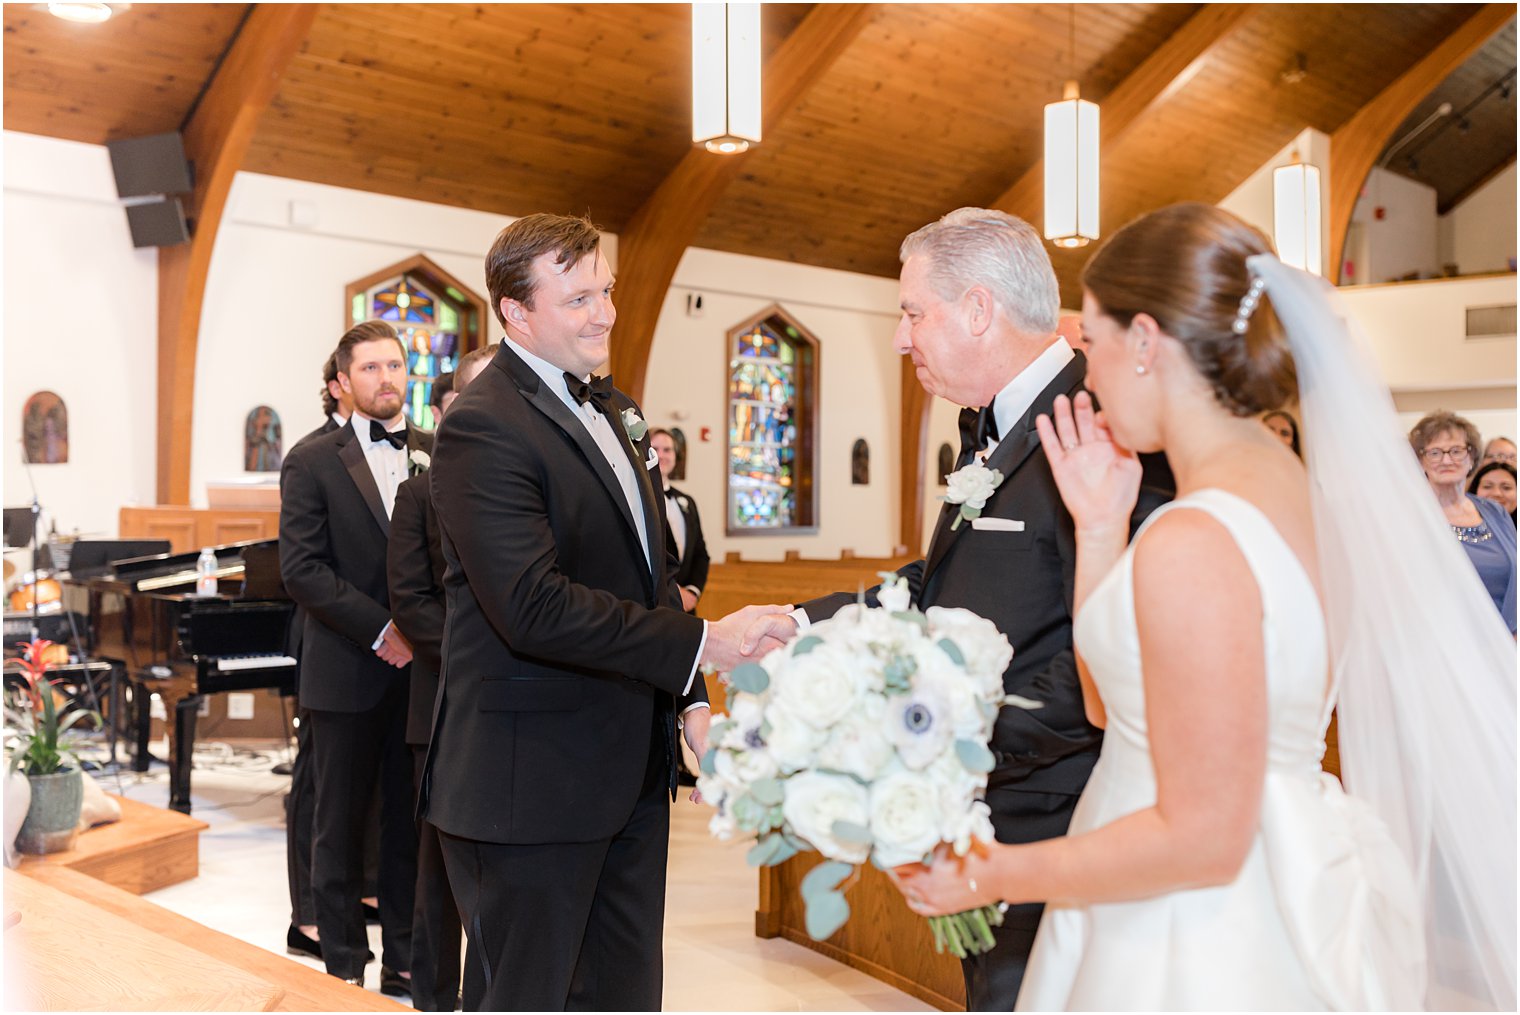 dad gives bride away during traditional wedding ceremony at the Church of the Presentation